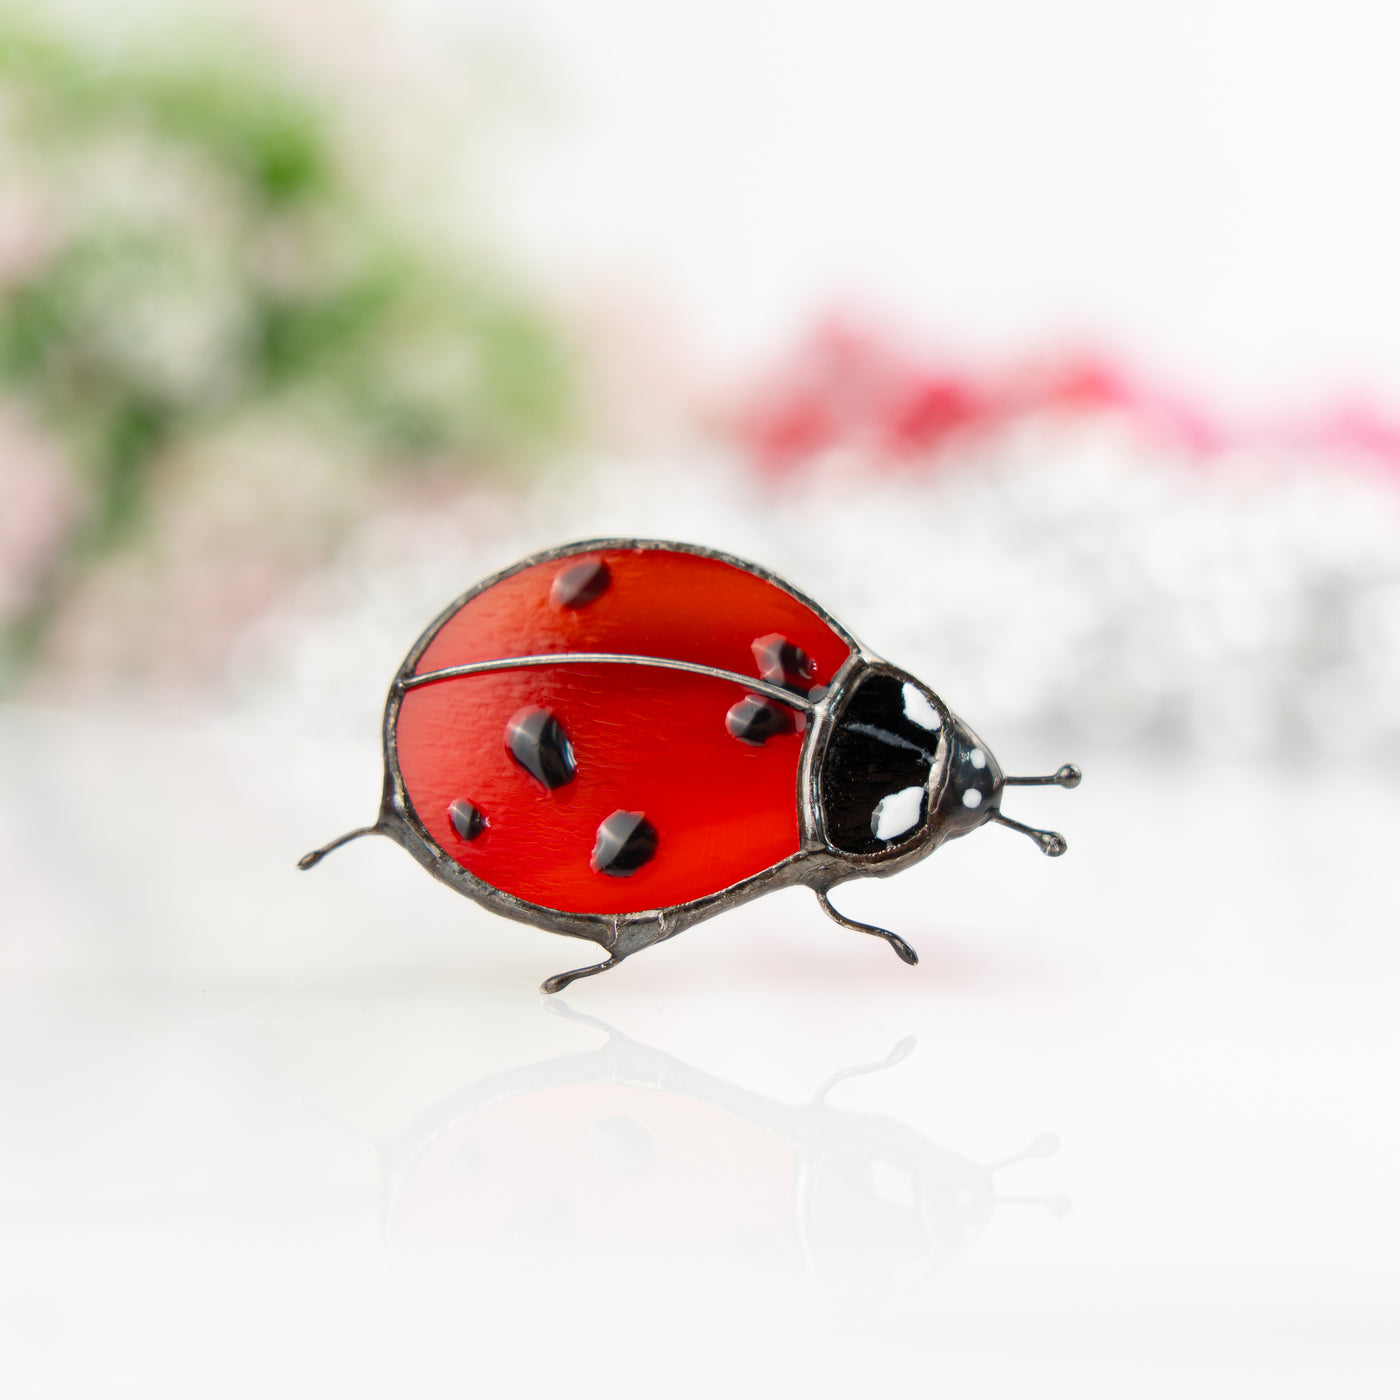 Stained glass red ladybug brooch for women